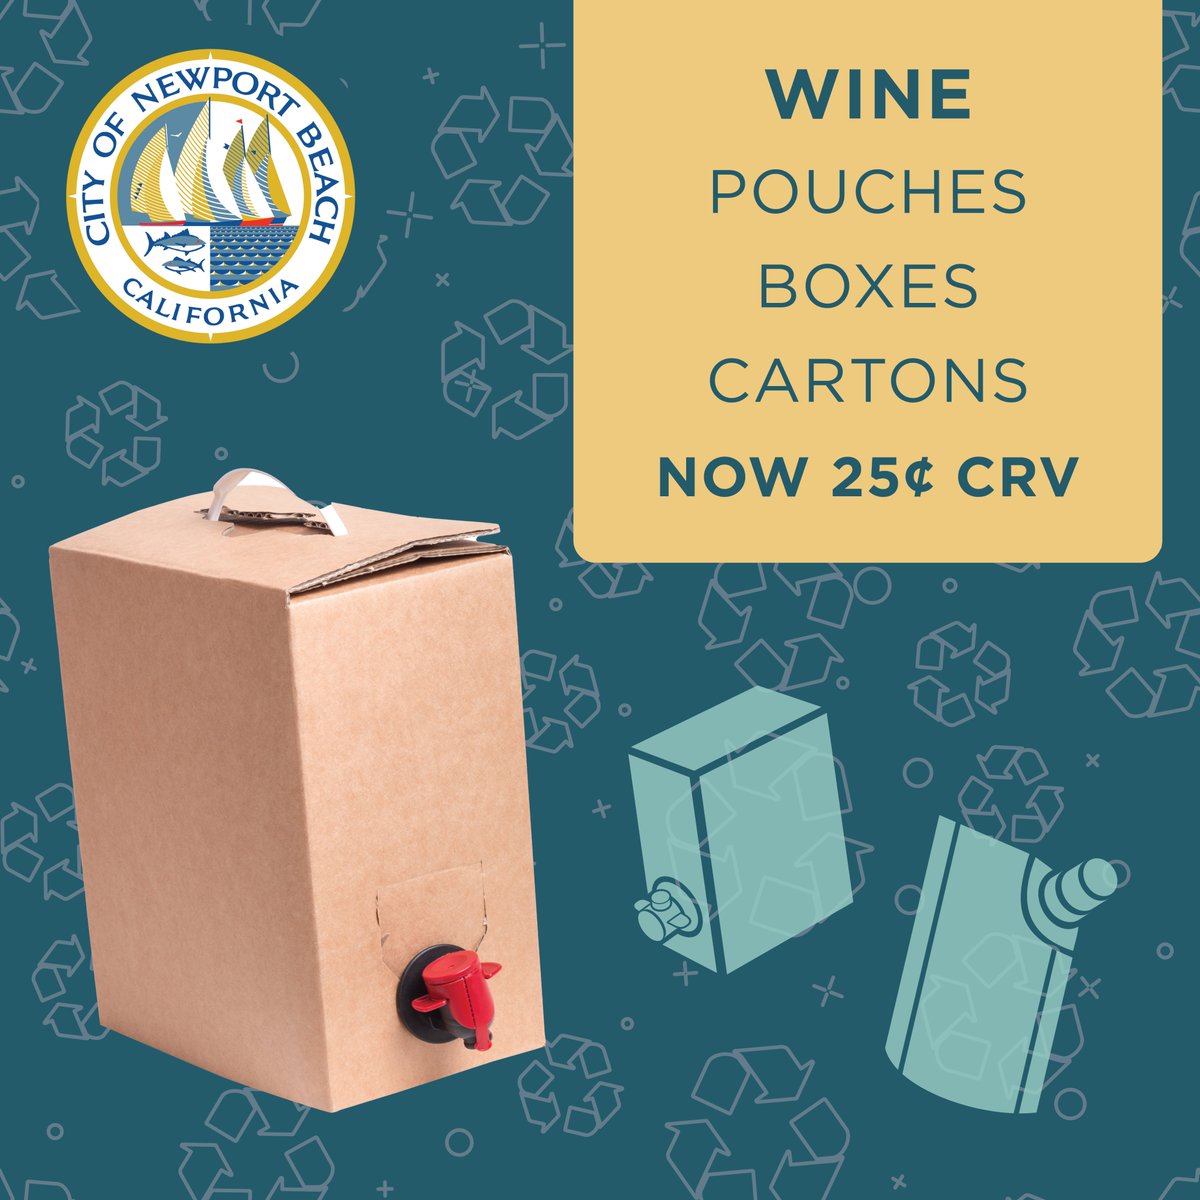 Don't toss those wine boxes—they're valuable now! Thanks to @CalRecycle's Recycling Program, containers like Bag-in-Box, Multi-Layer Pouch, Paperback Carton or Plastic Pouch are worth $0.25 each when recycled. #NBRecycles